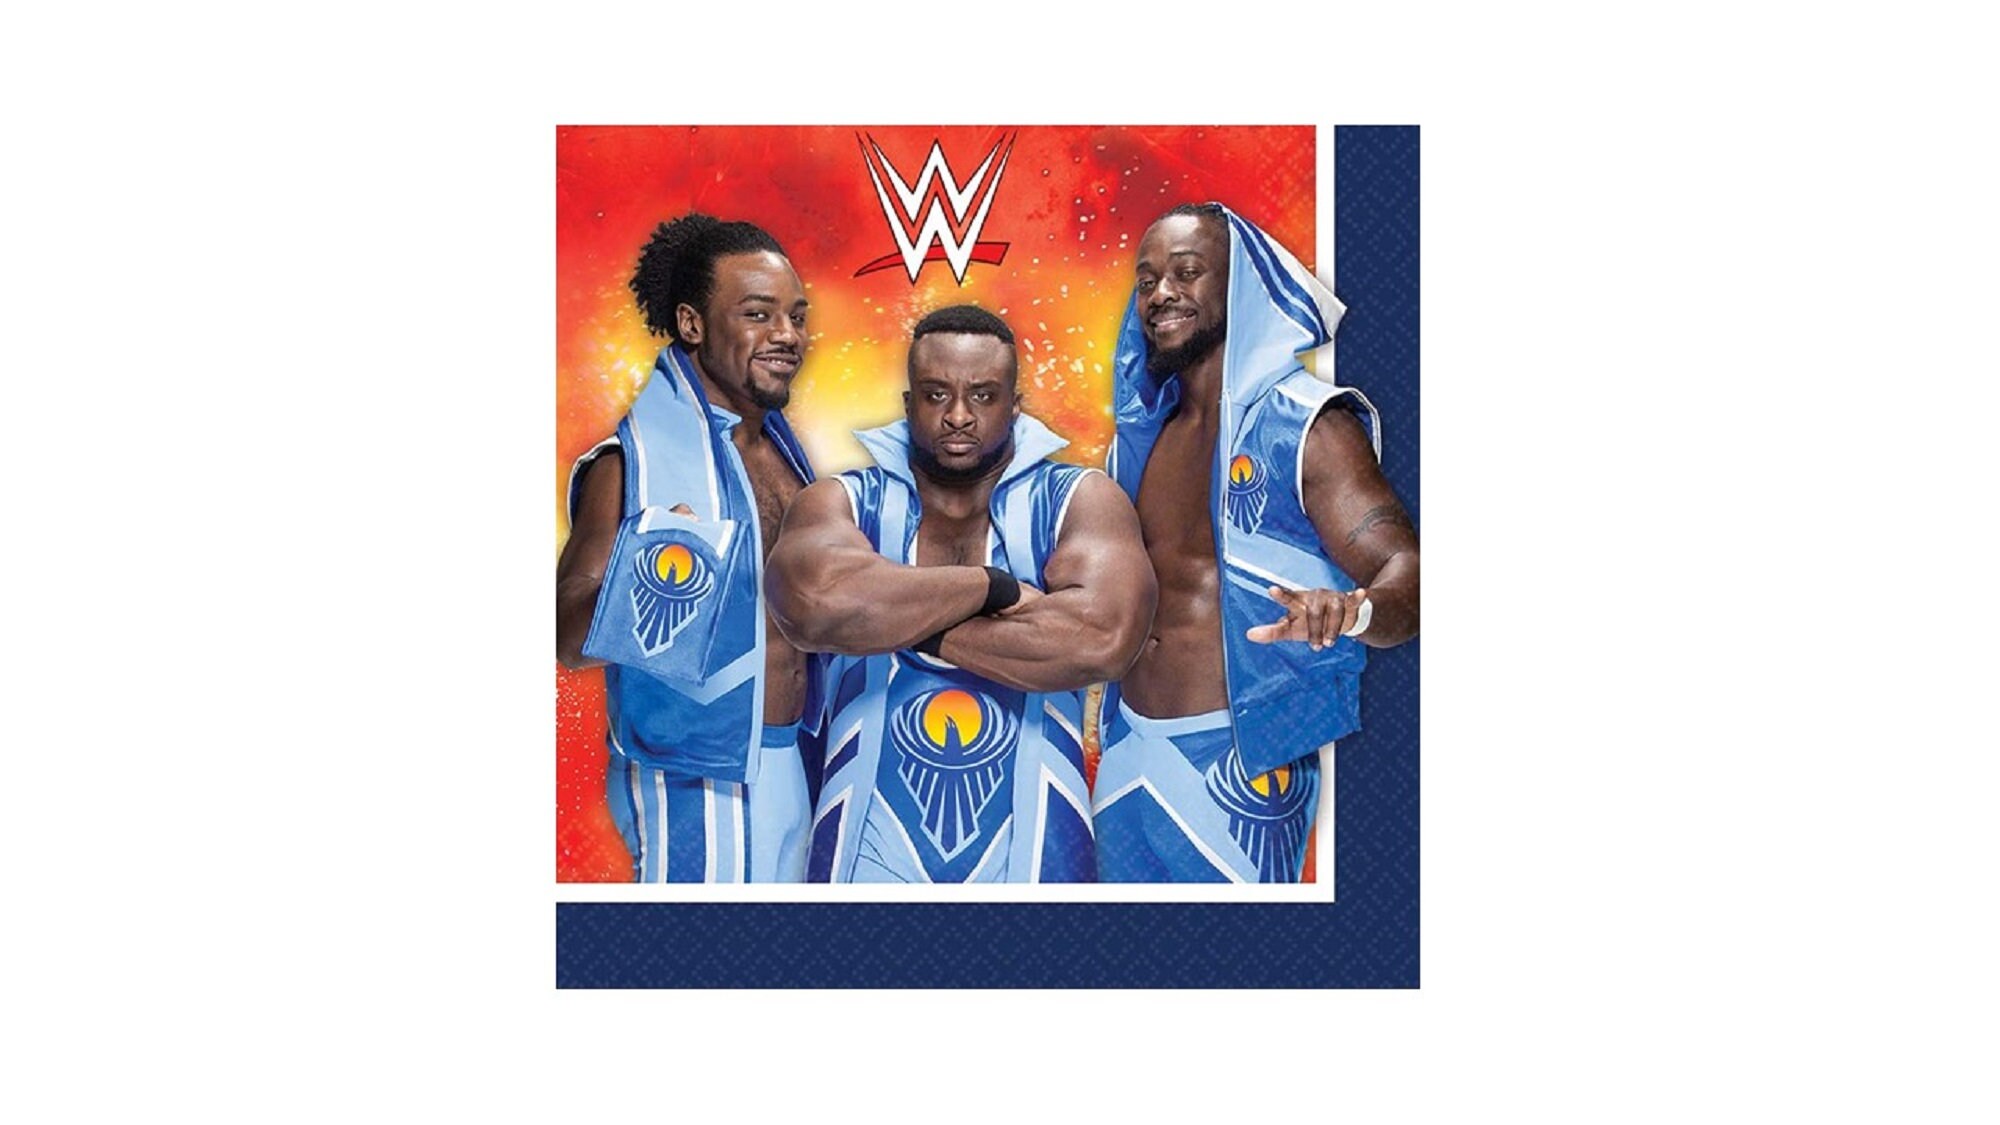 Designware 16x WWE Bash Napkins RRP 1.40 CLEARANCE XL 89p or 2 for 1.50